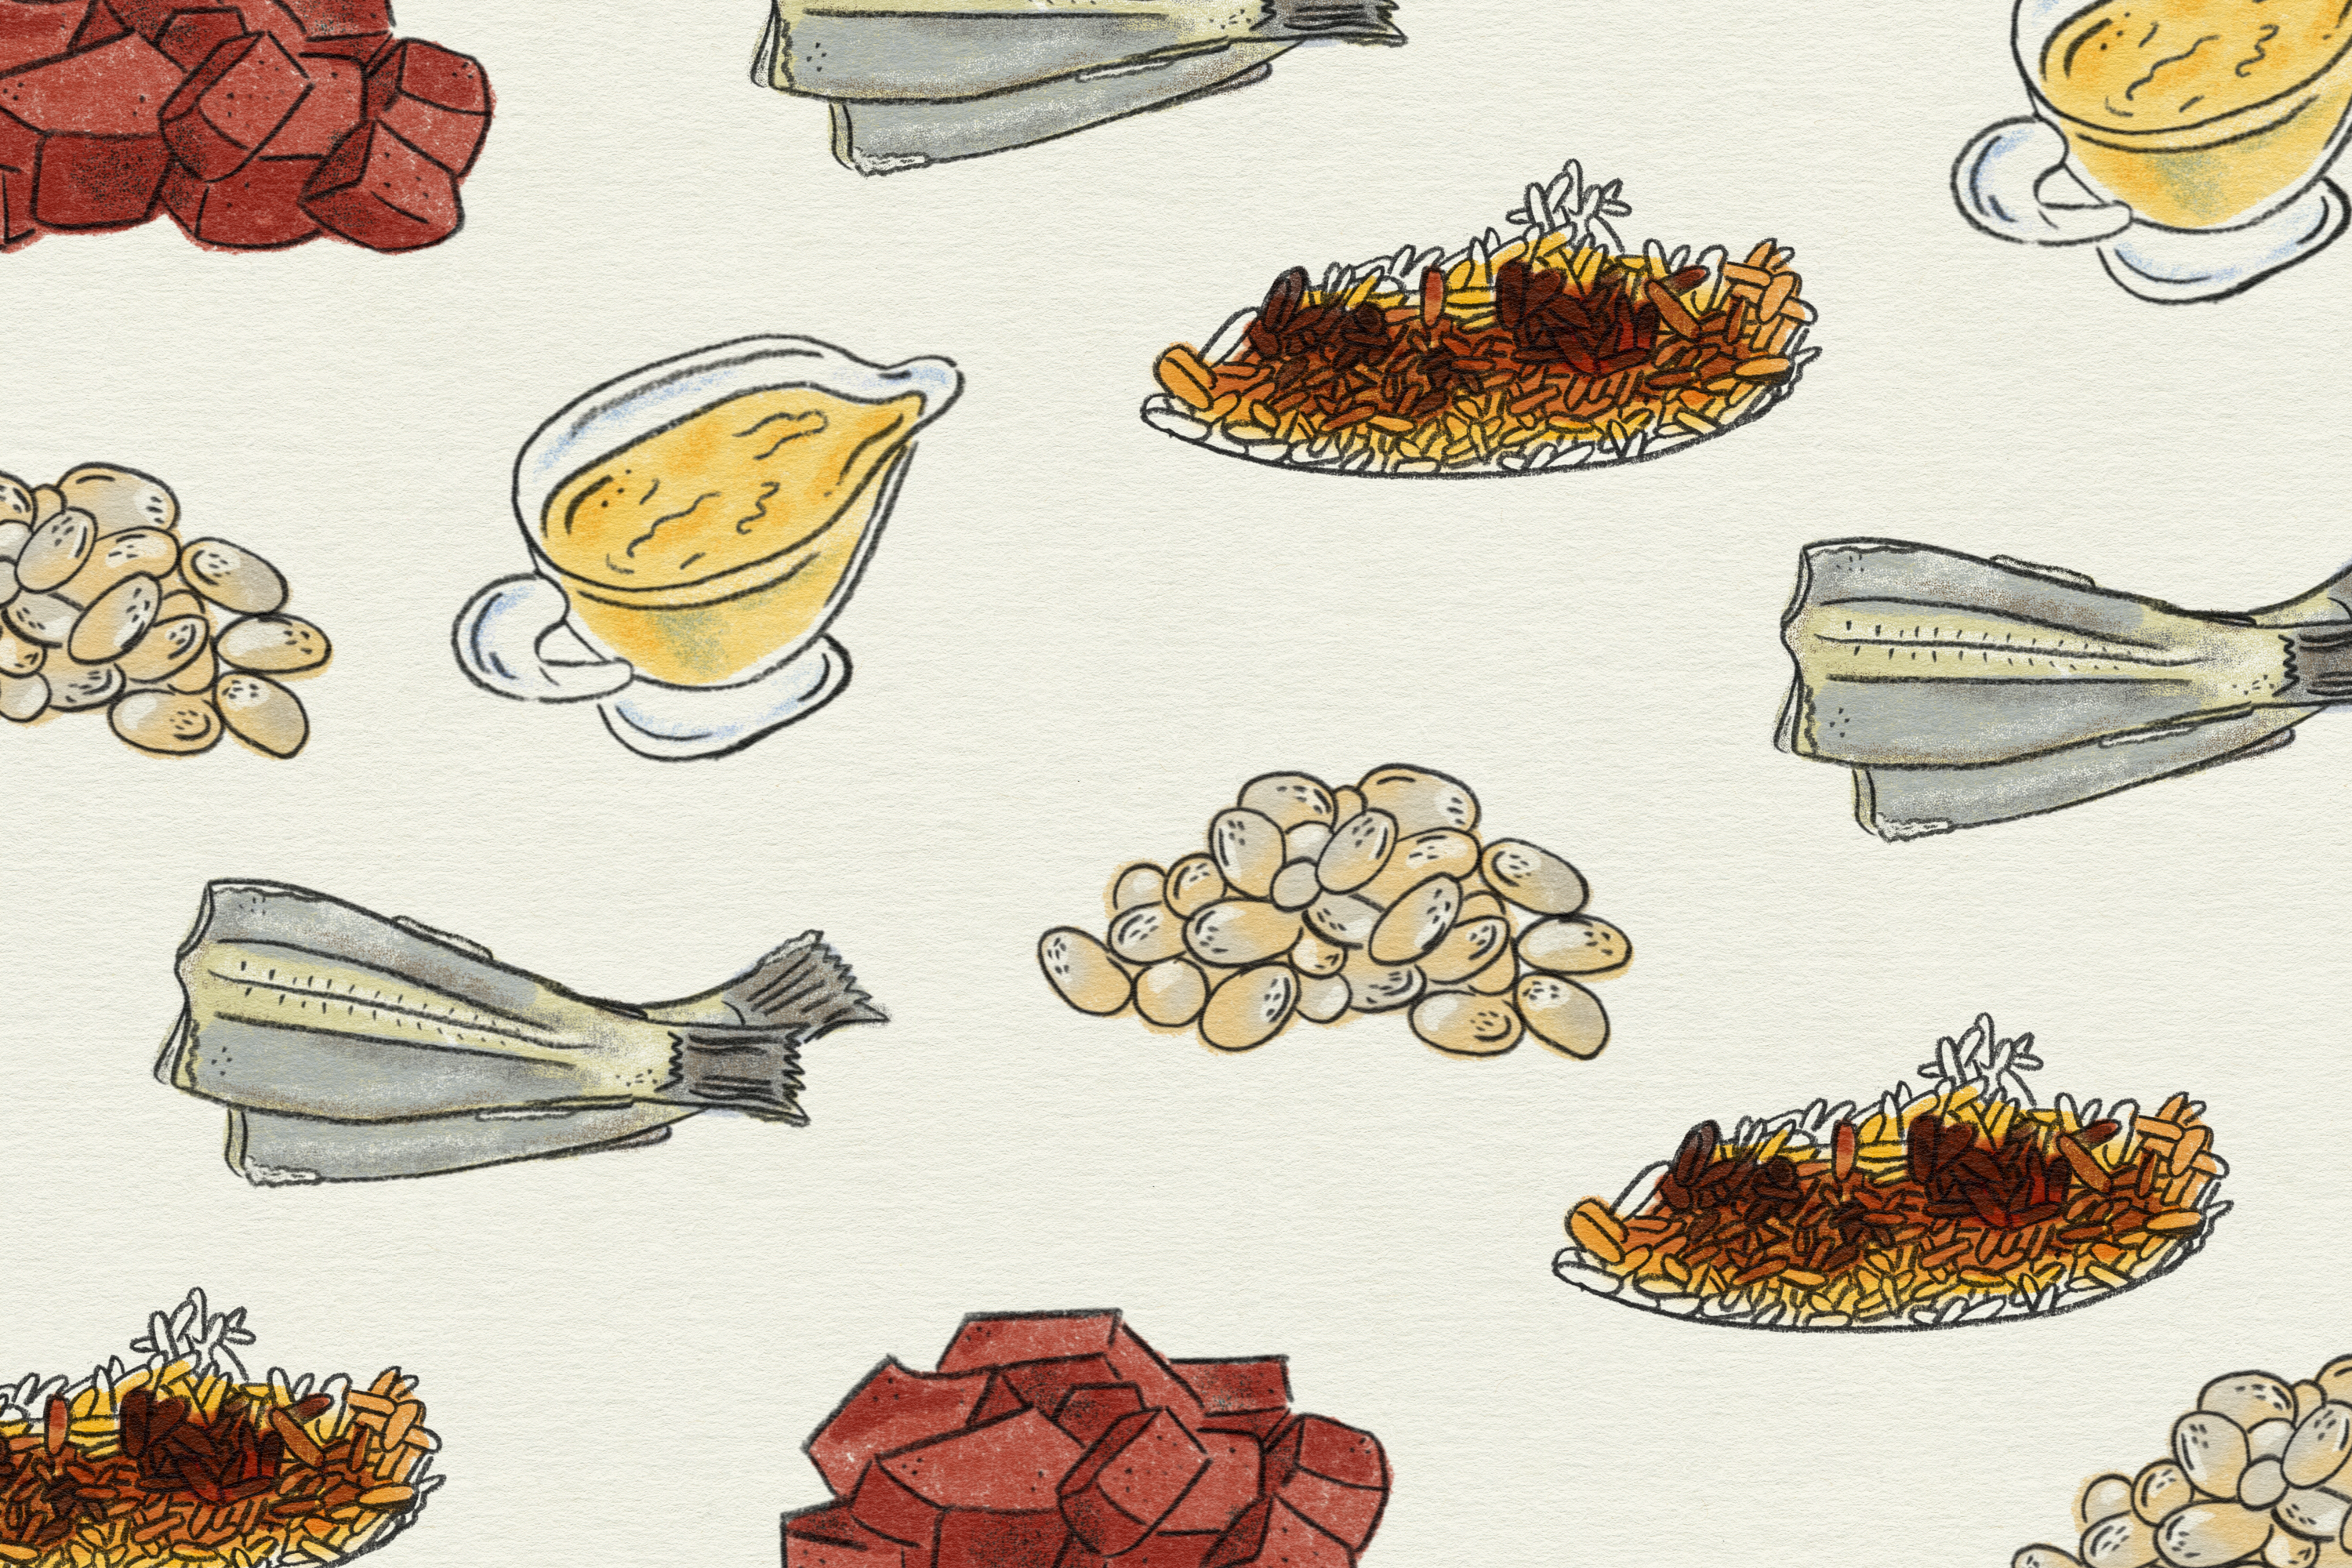 An illustration of blood, saltfish, custards, beans, and crispy-bottom rice, in a repeating pattern.